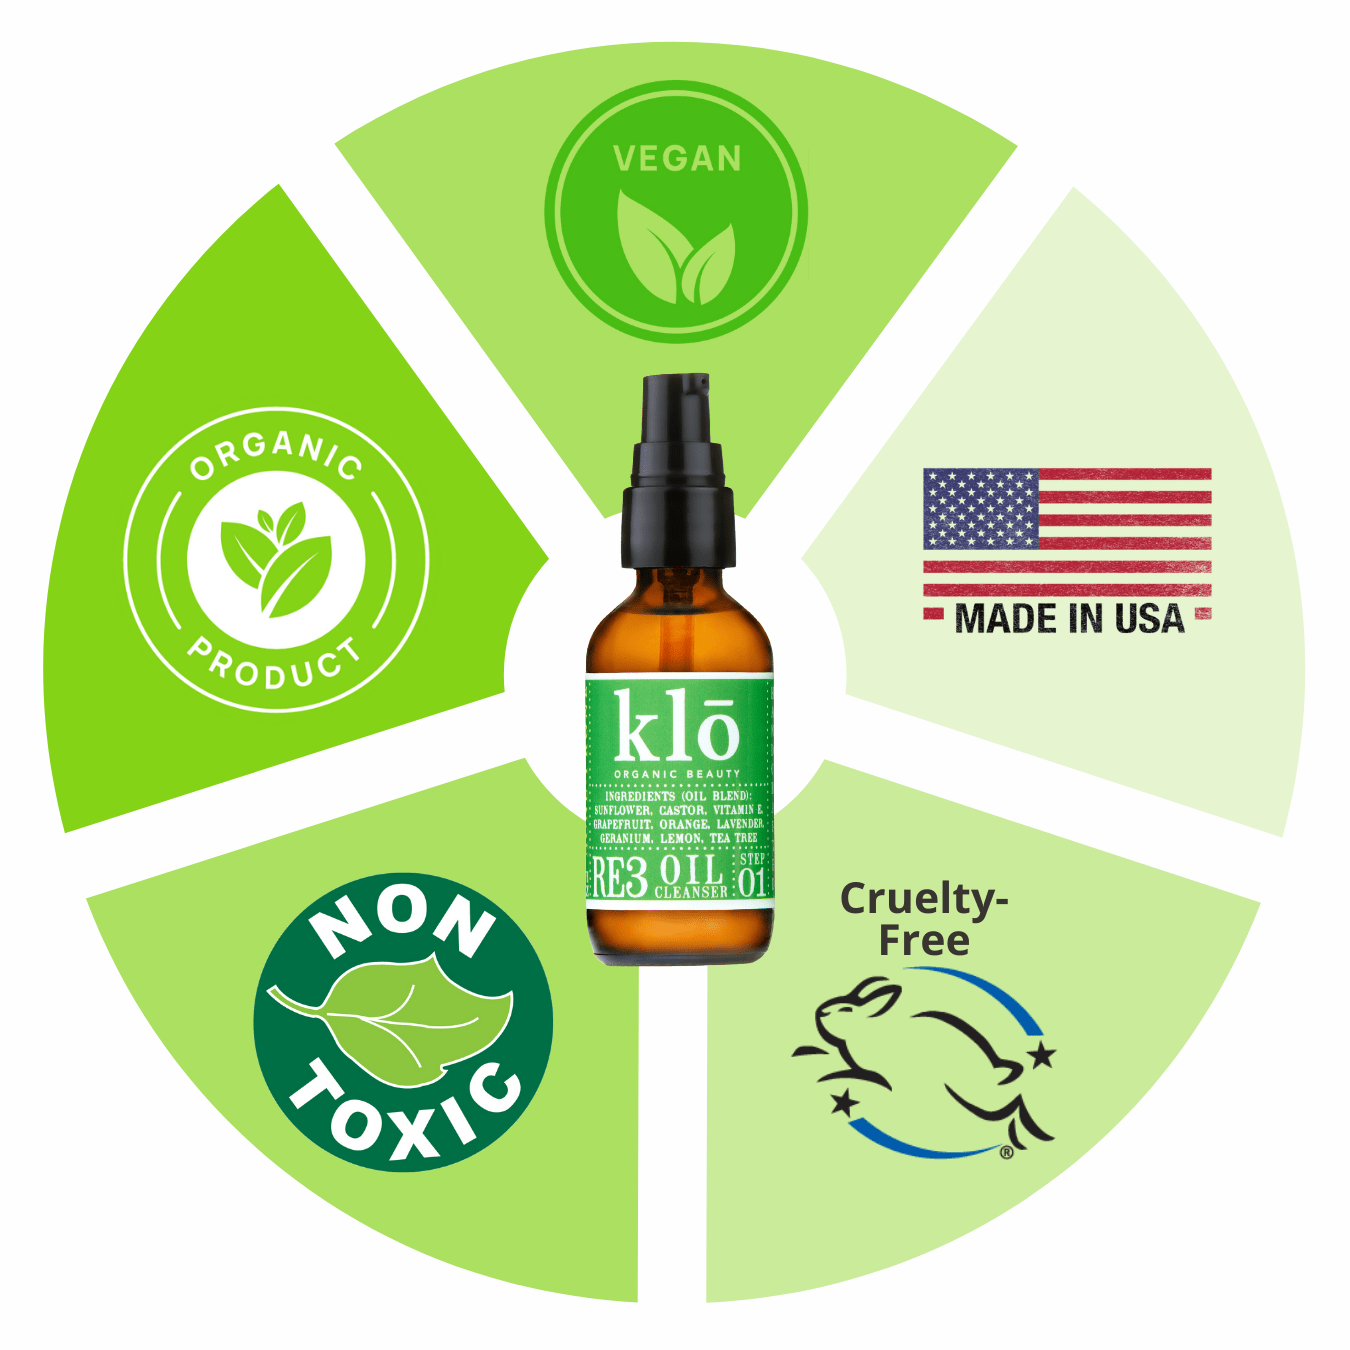 Klo Organic Beauty RE3 oil cleanser for acne-prone skin is vegan, organic, nontoxic, cruelty-free, and made in the USA.